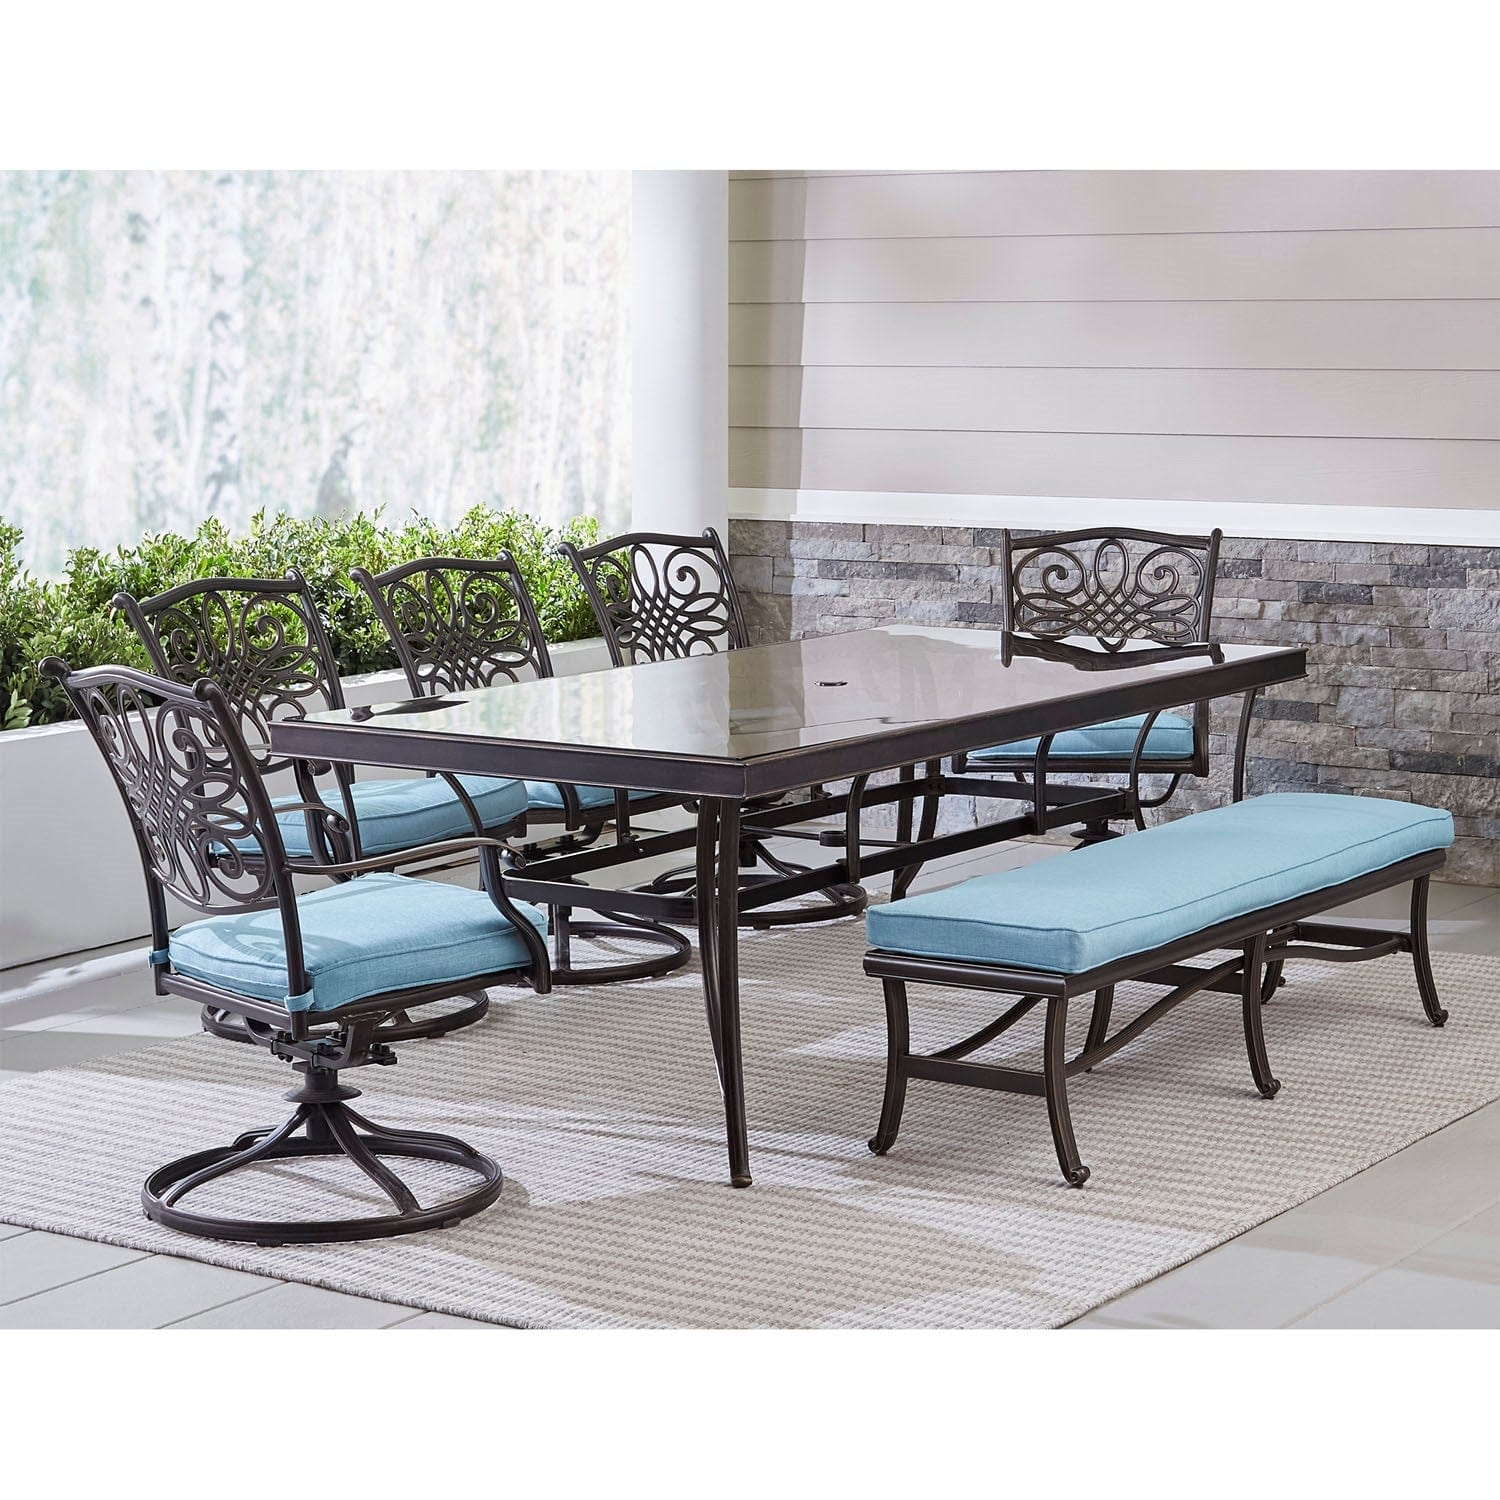 Hanover Outdoor Dining Set Hanover - Traditions 7-Piece Outdoor Dining Set in Blue with 5 Swivel Rockers, a Cushioned Bench, and a 42" x 84" Glass-Top Table - TRADDN7PCSW5GBN-BLU